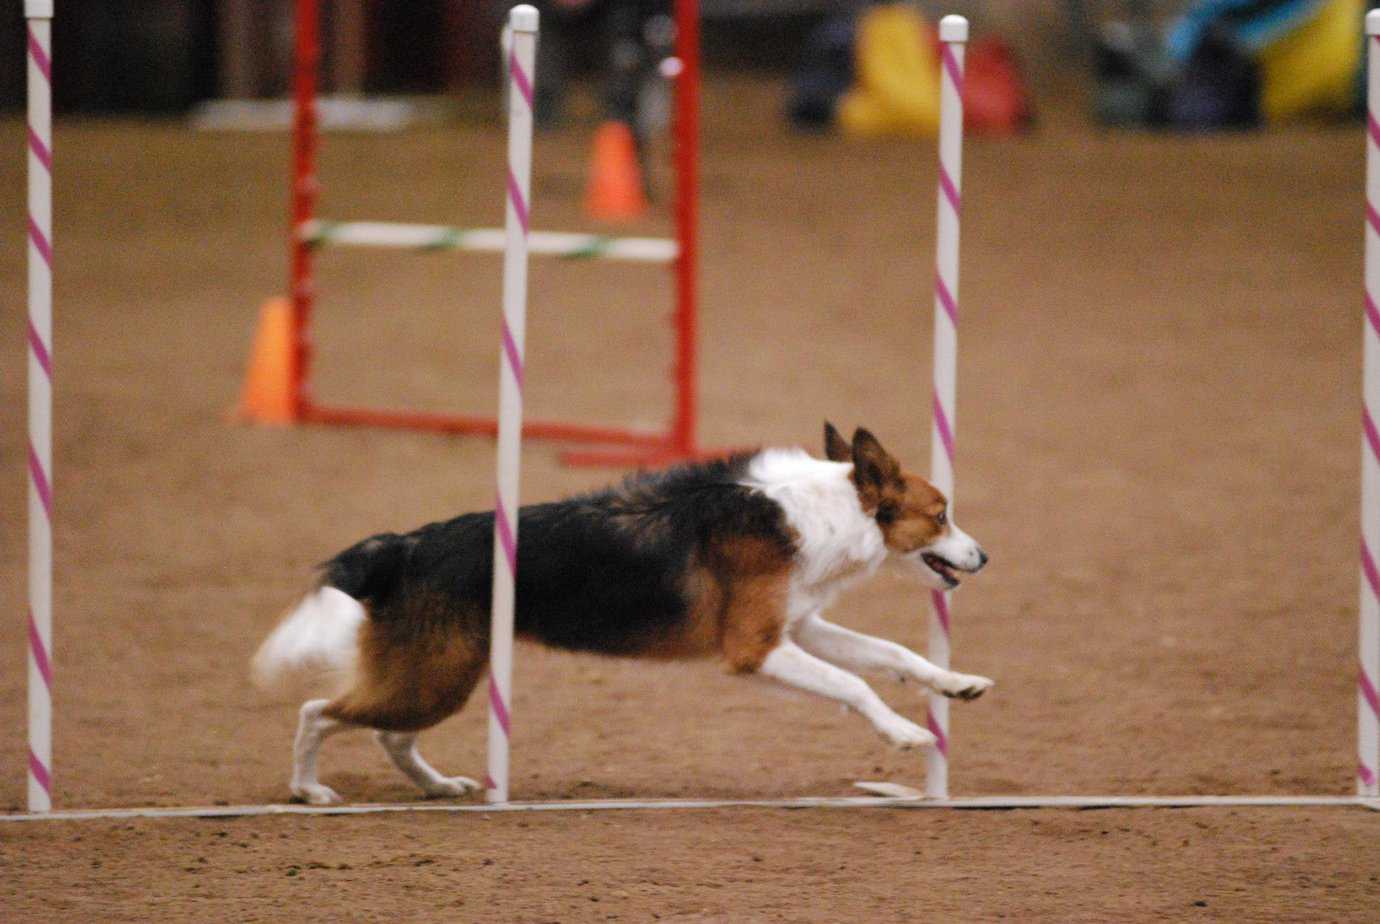 Agility Dog going through the Weave Poles